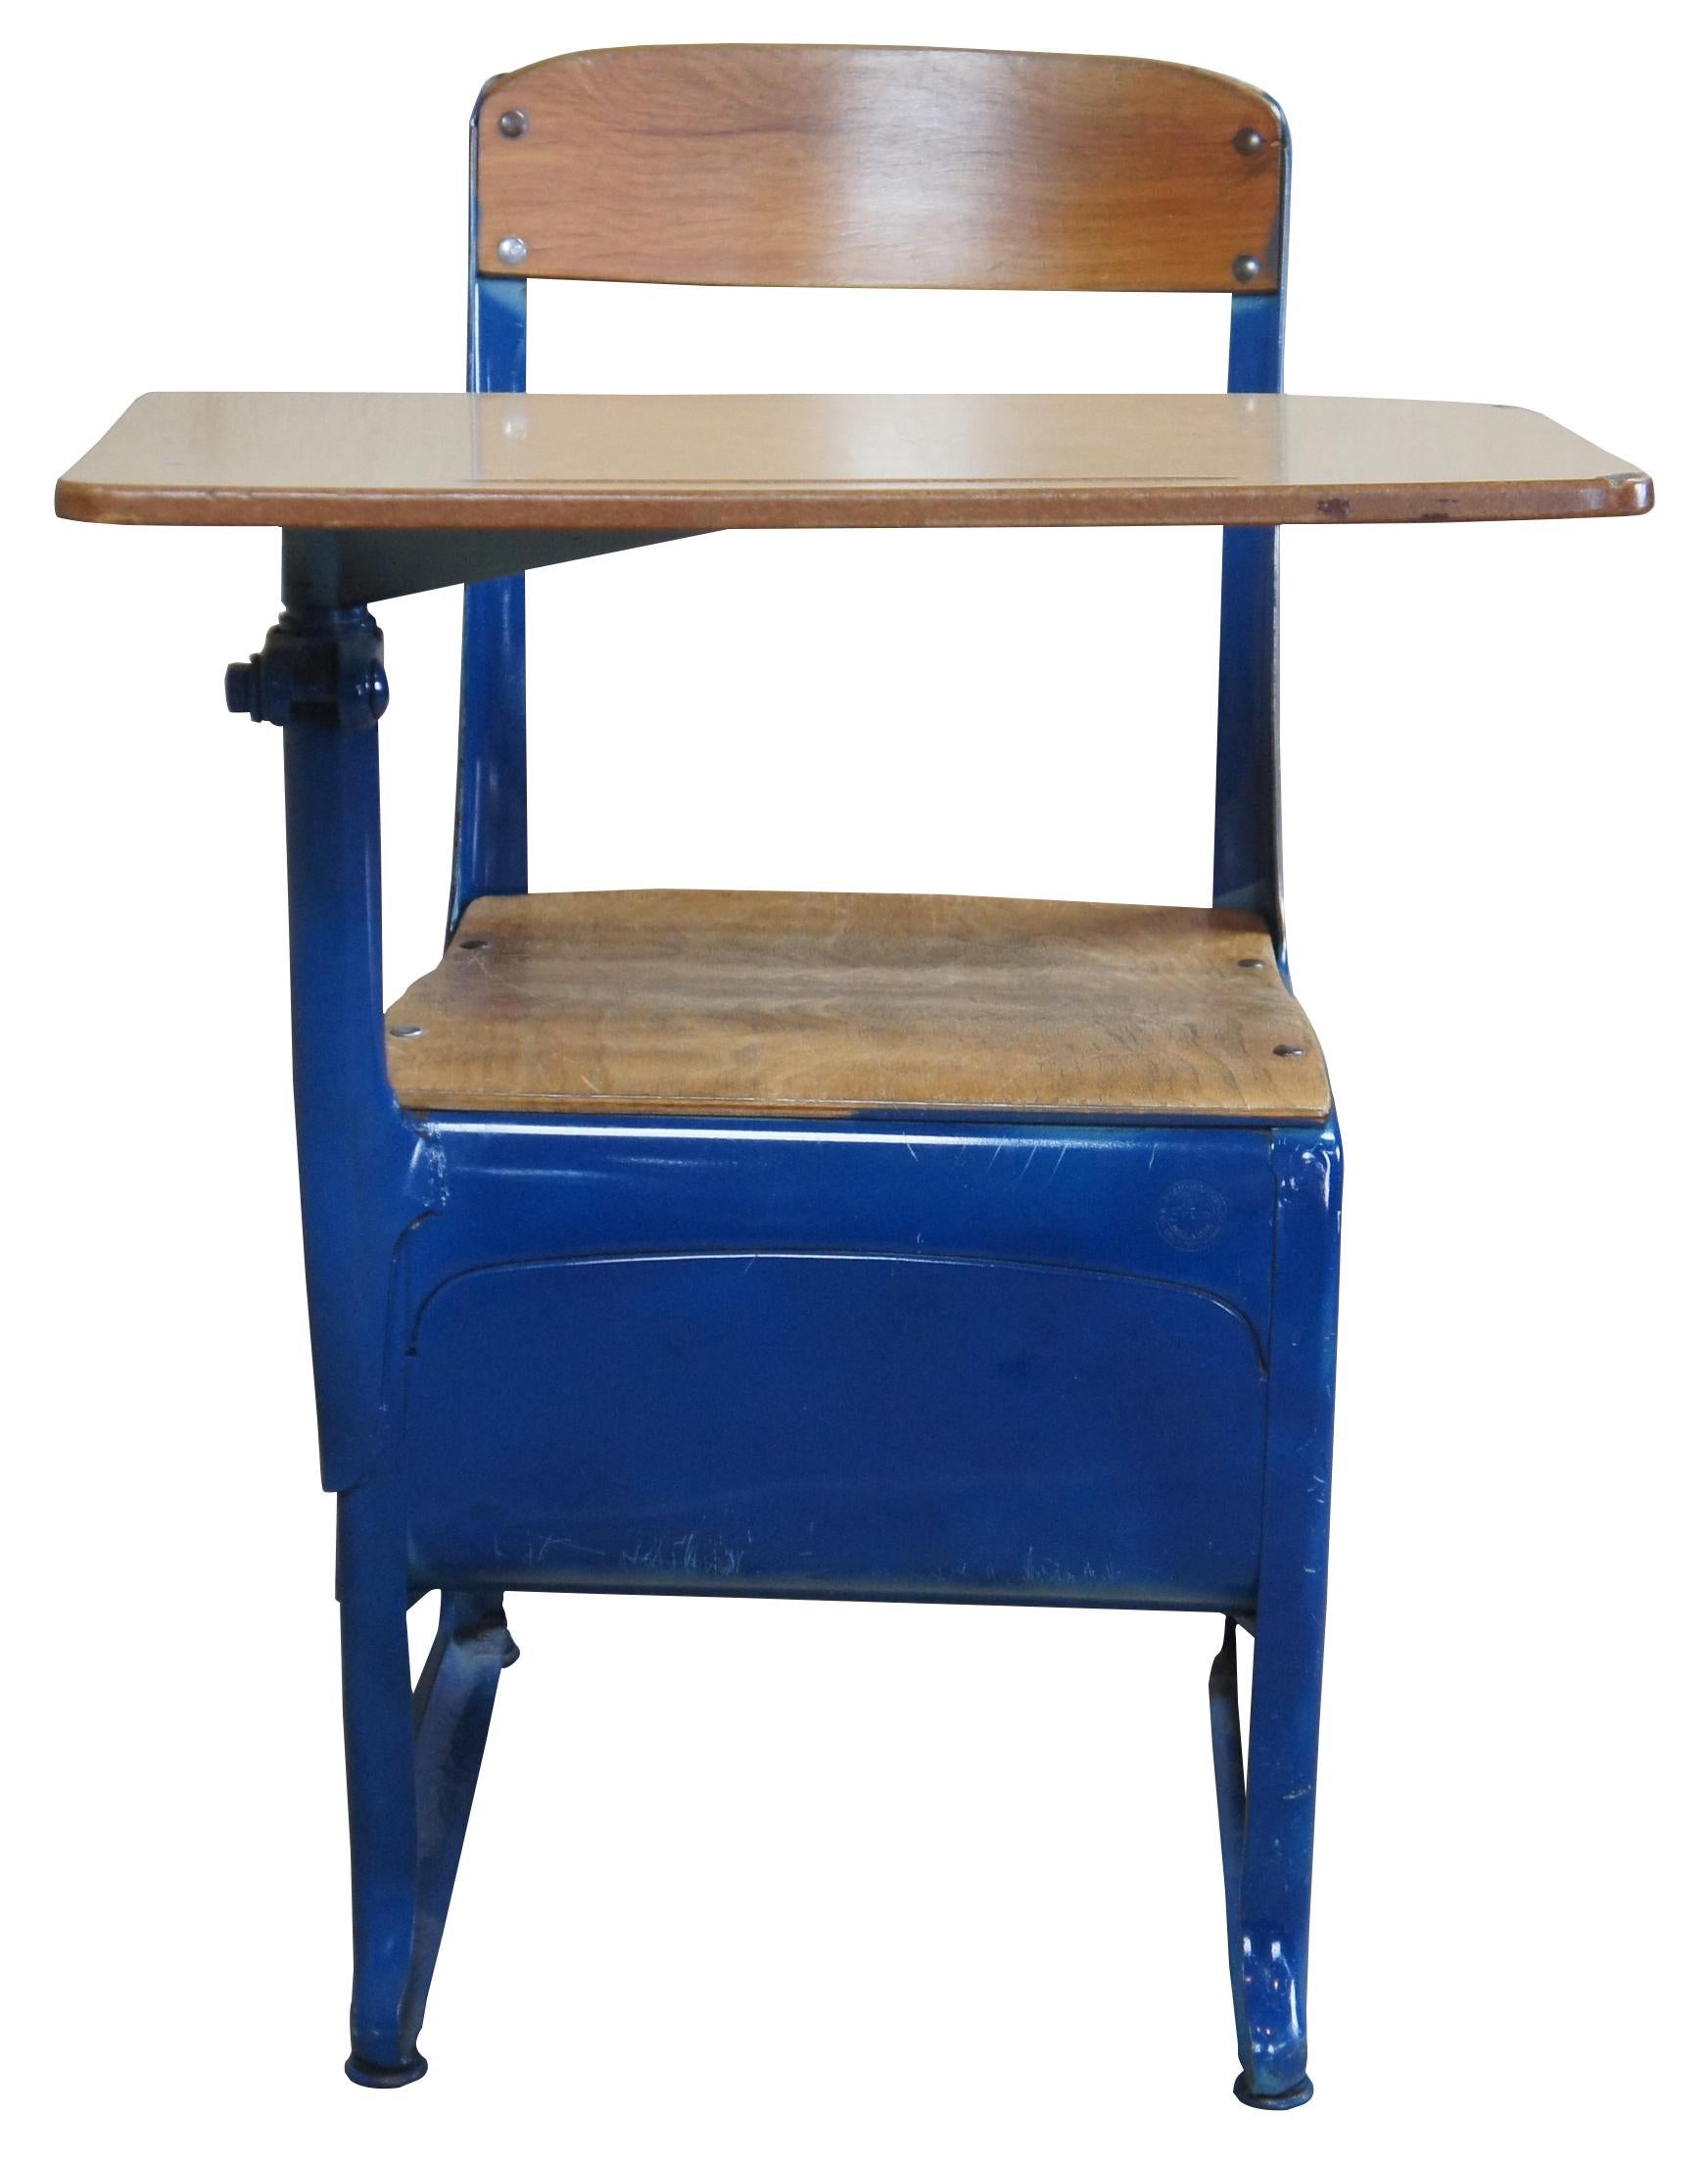 Mid century students desk by American Seating Company of Grand Rapids Michigan. Envoy Line, circa 1940s. Made in USA.

Measures: Desk height (adjustable) 28